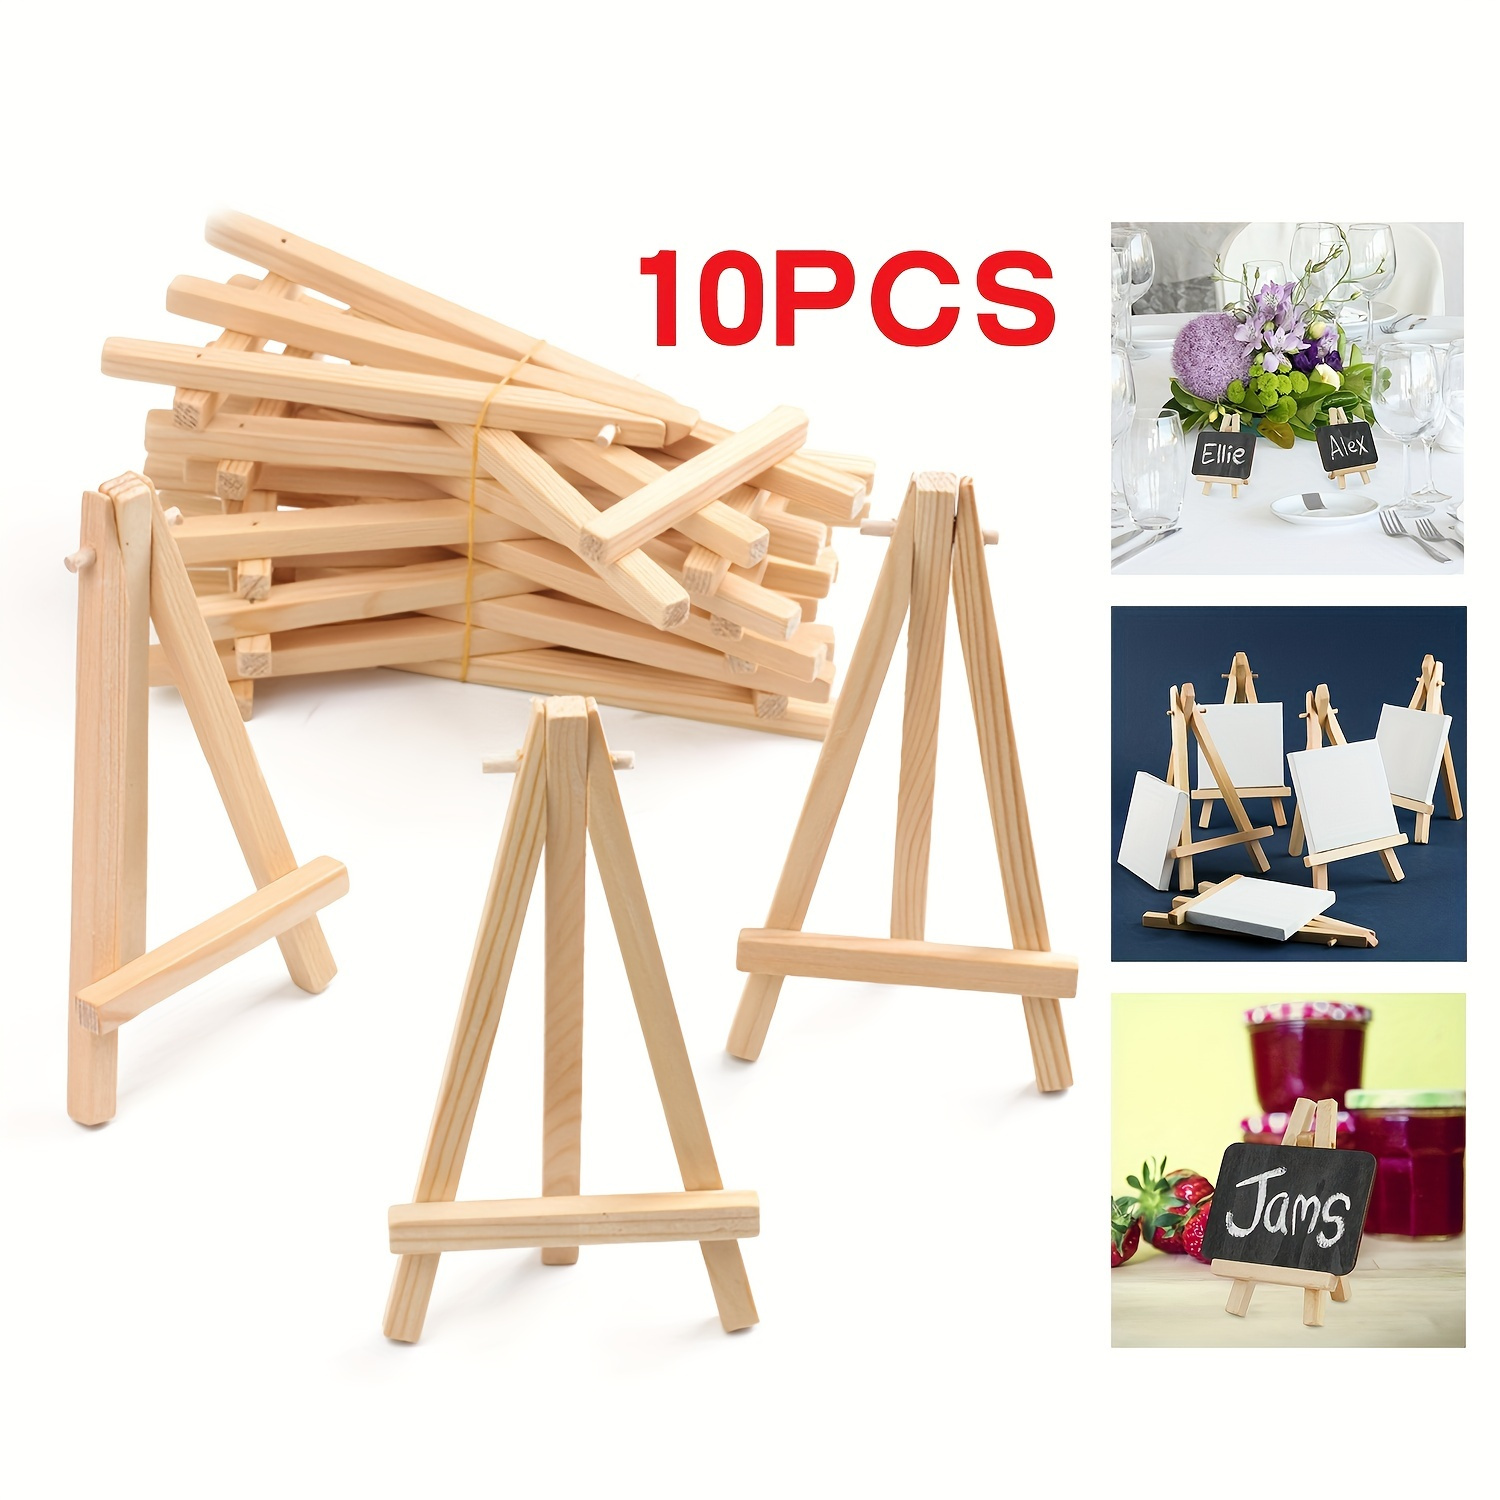 

10pcs Mini Wooden Easels, Wood Fiber Board Artist Display Stand, Wedding Table Number Holder, Event Party Sign Display